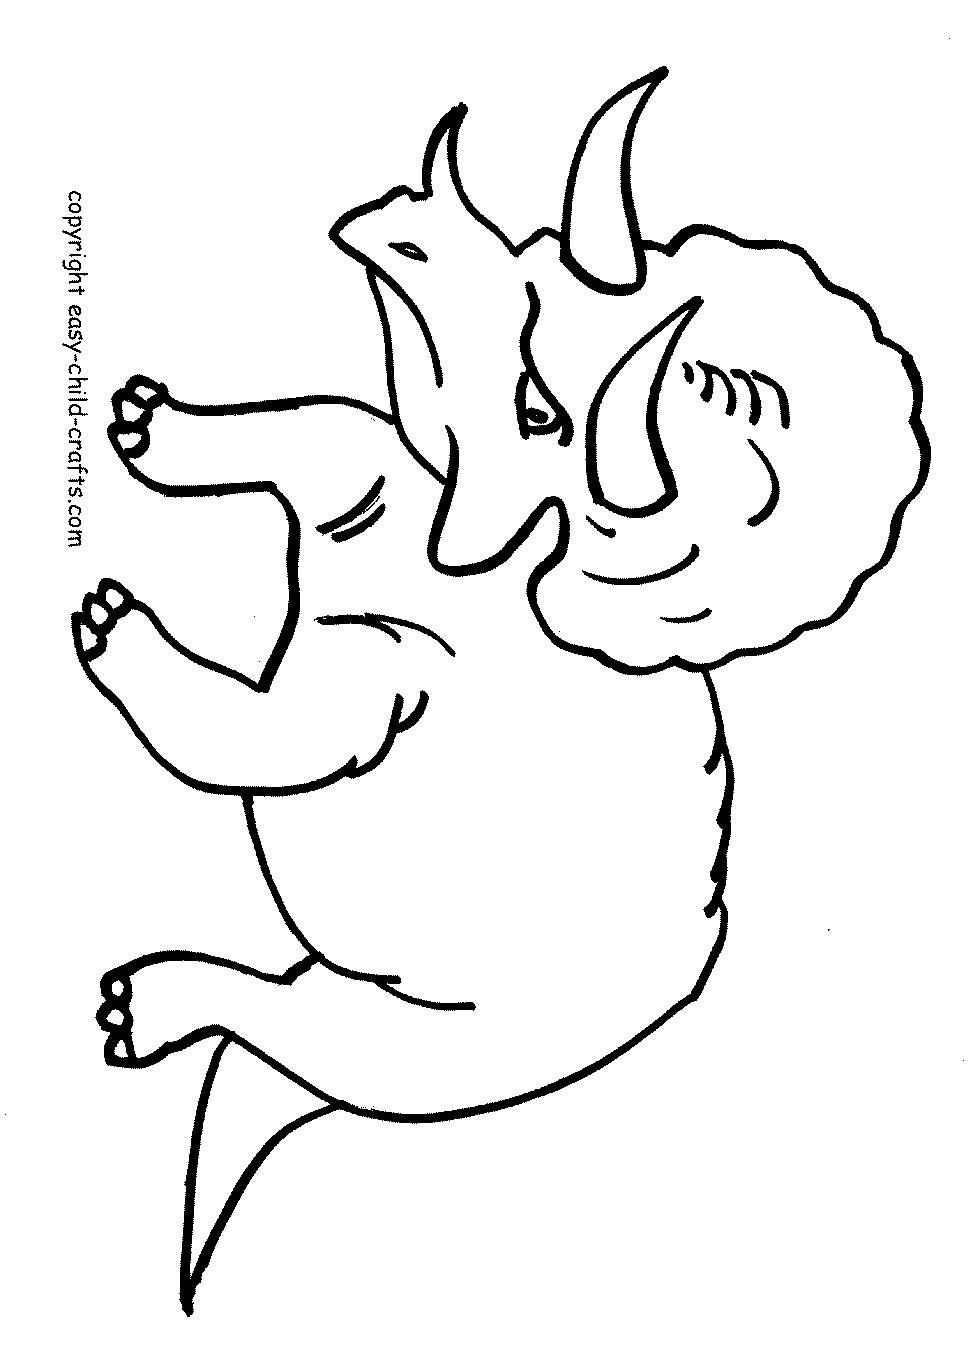 free printable dinosaur coloring pages dinosaur coloring pages 001 dinosaur coloring sheets printable free dinosaur coloring pages 